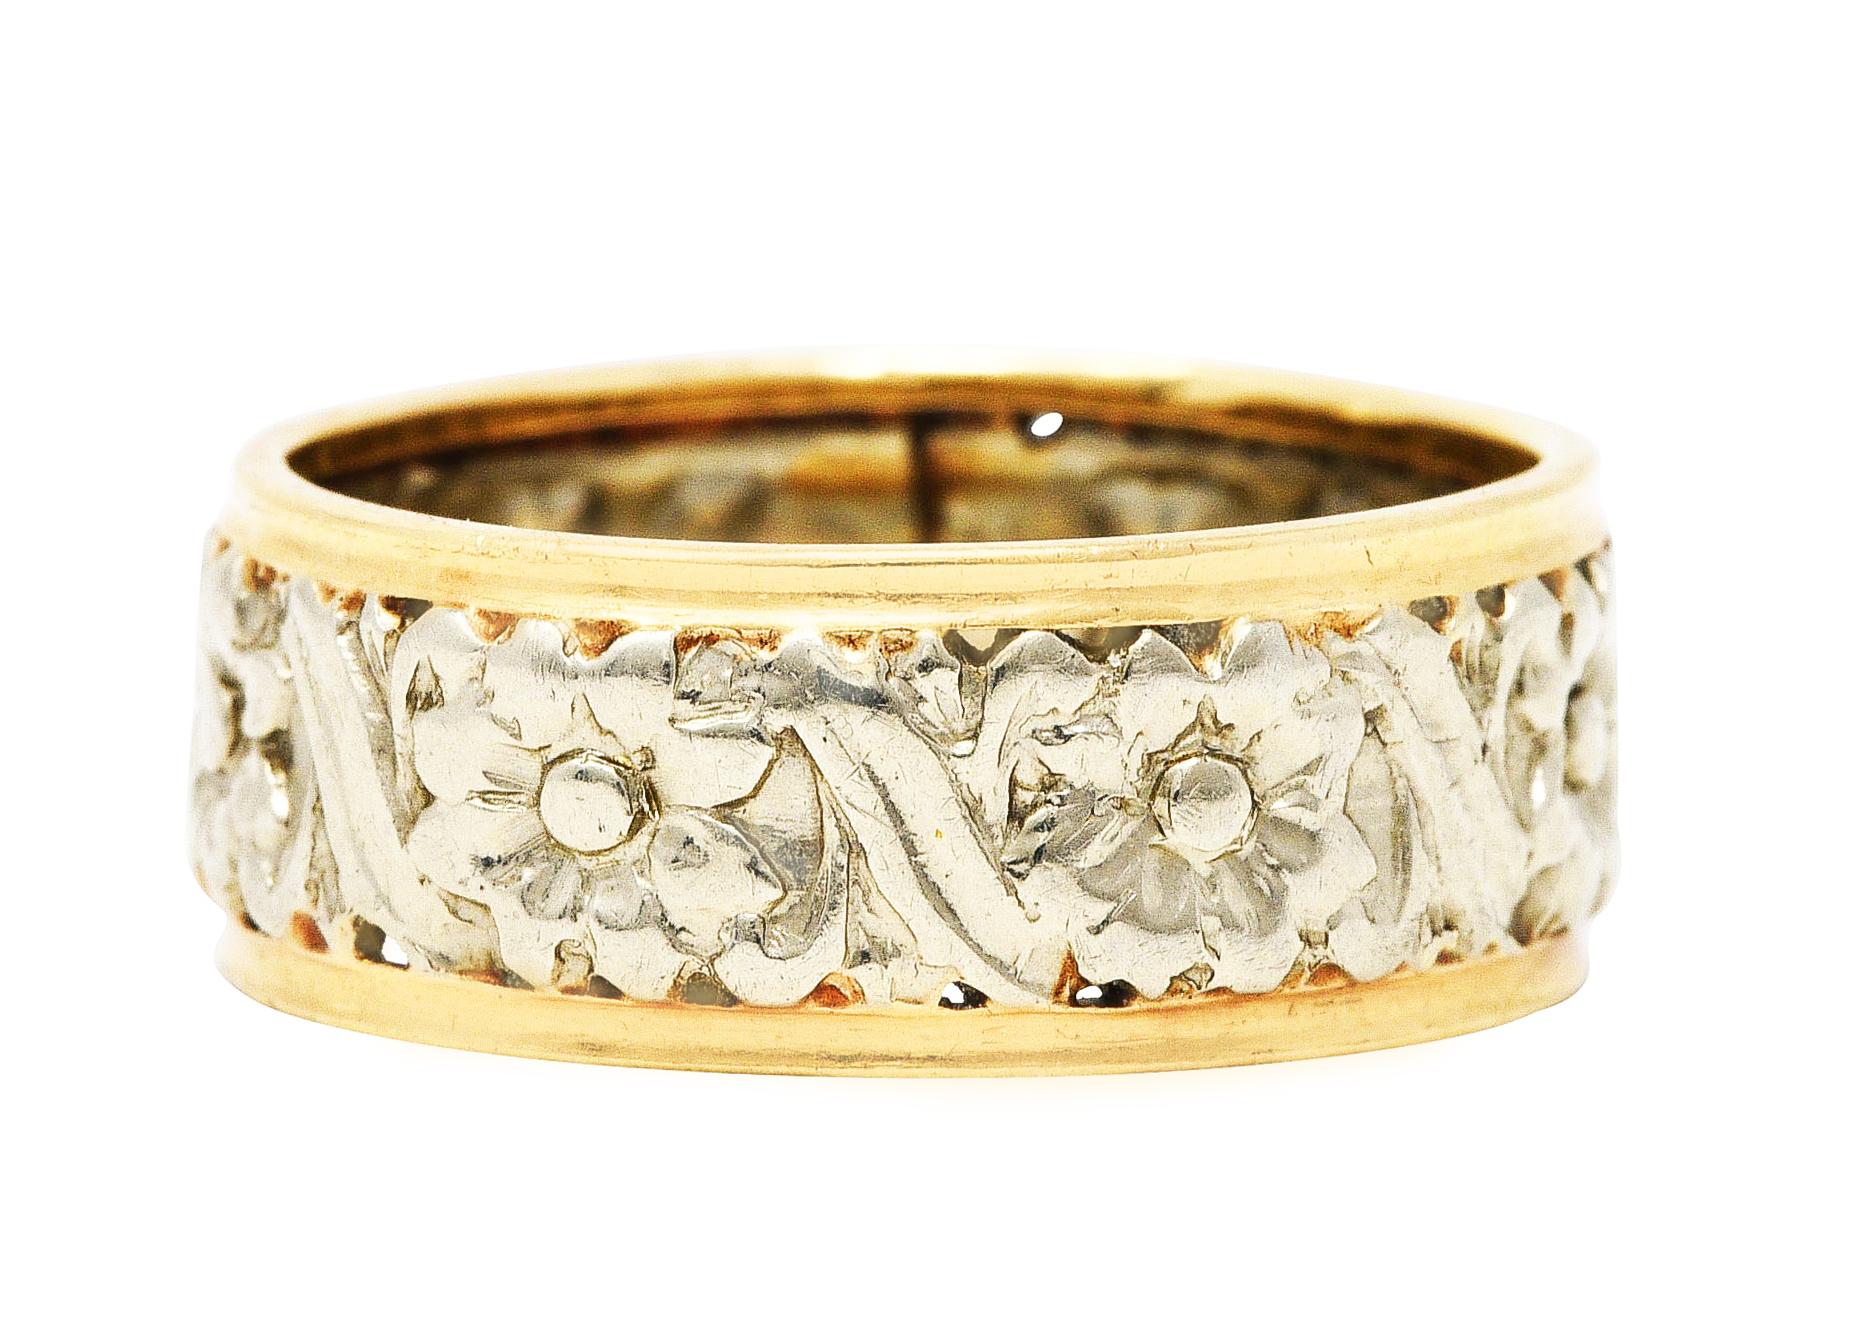 Band style ring with stylized floral detailing fully around 

Featuring a white gold mid-section with repoussè scrolling flowers

Flanked by ridged gold banding

Tested as 14 karat gold 

Circa: 1905

Ring size: 8 and not sizable 

Measures 8.0 mm